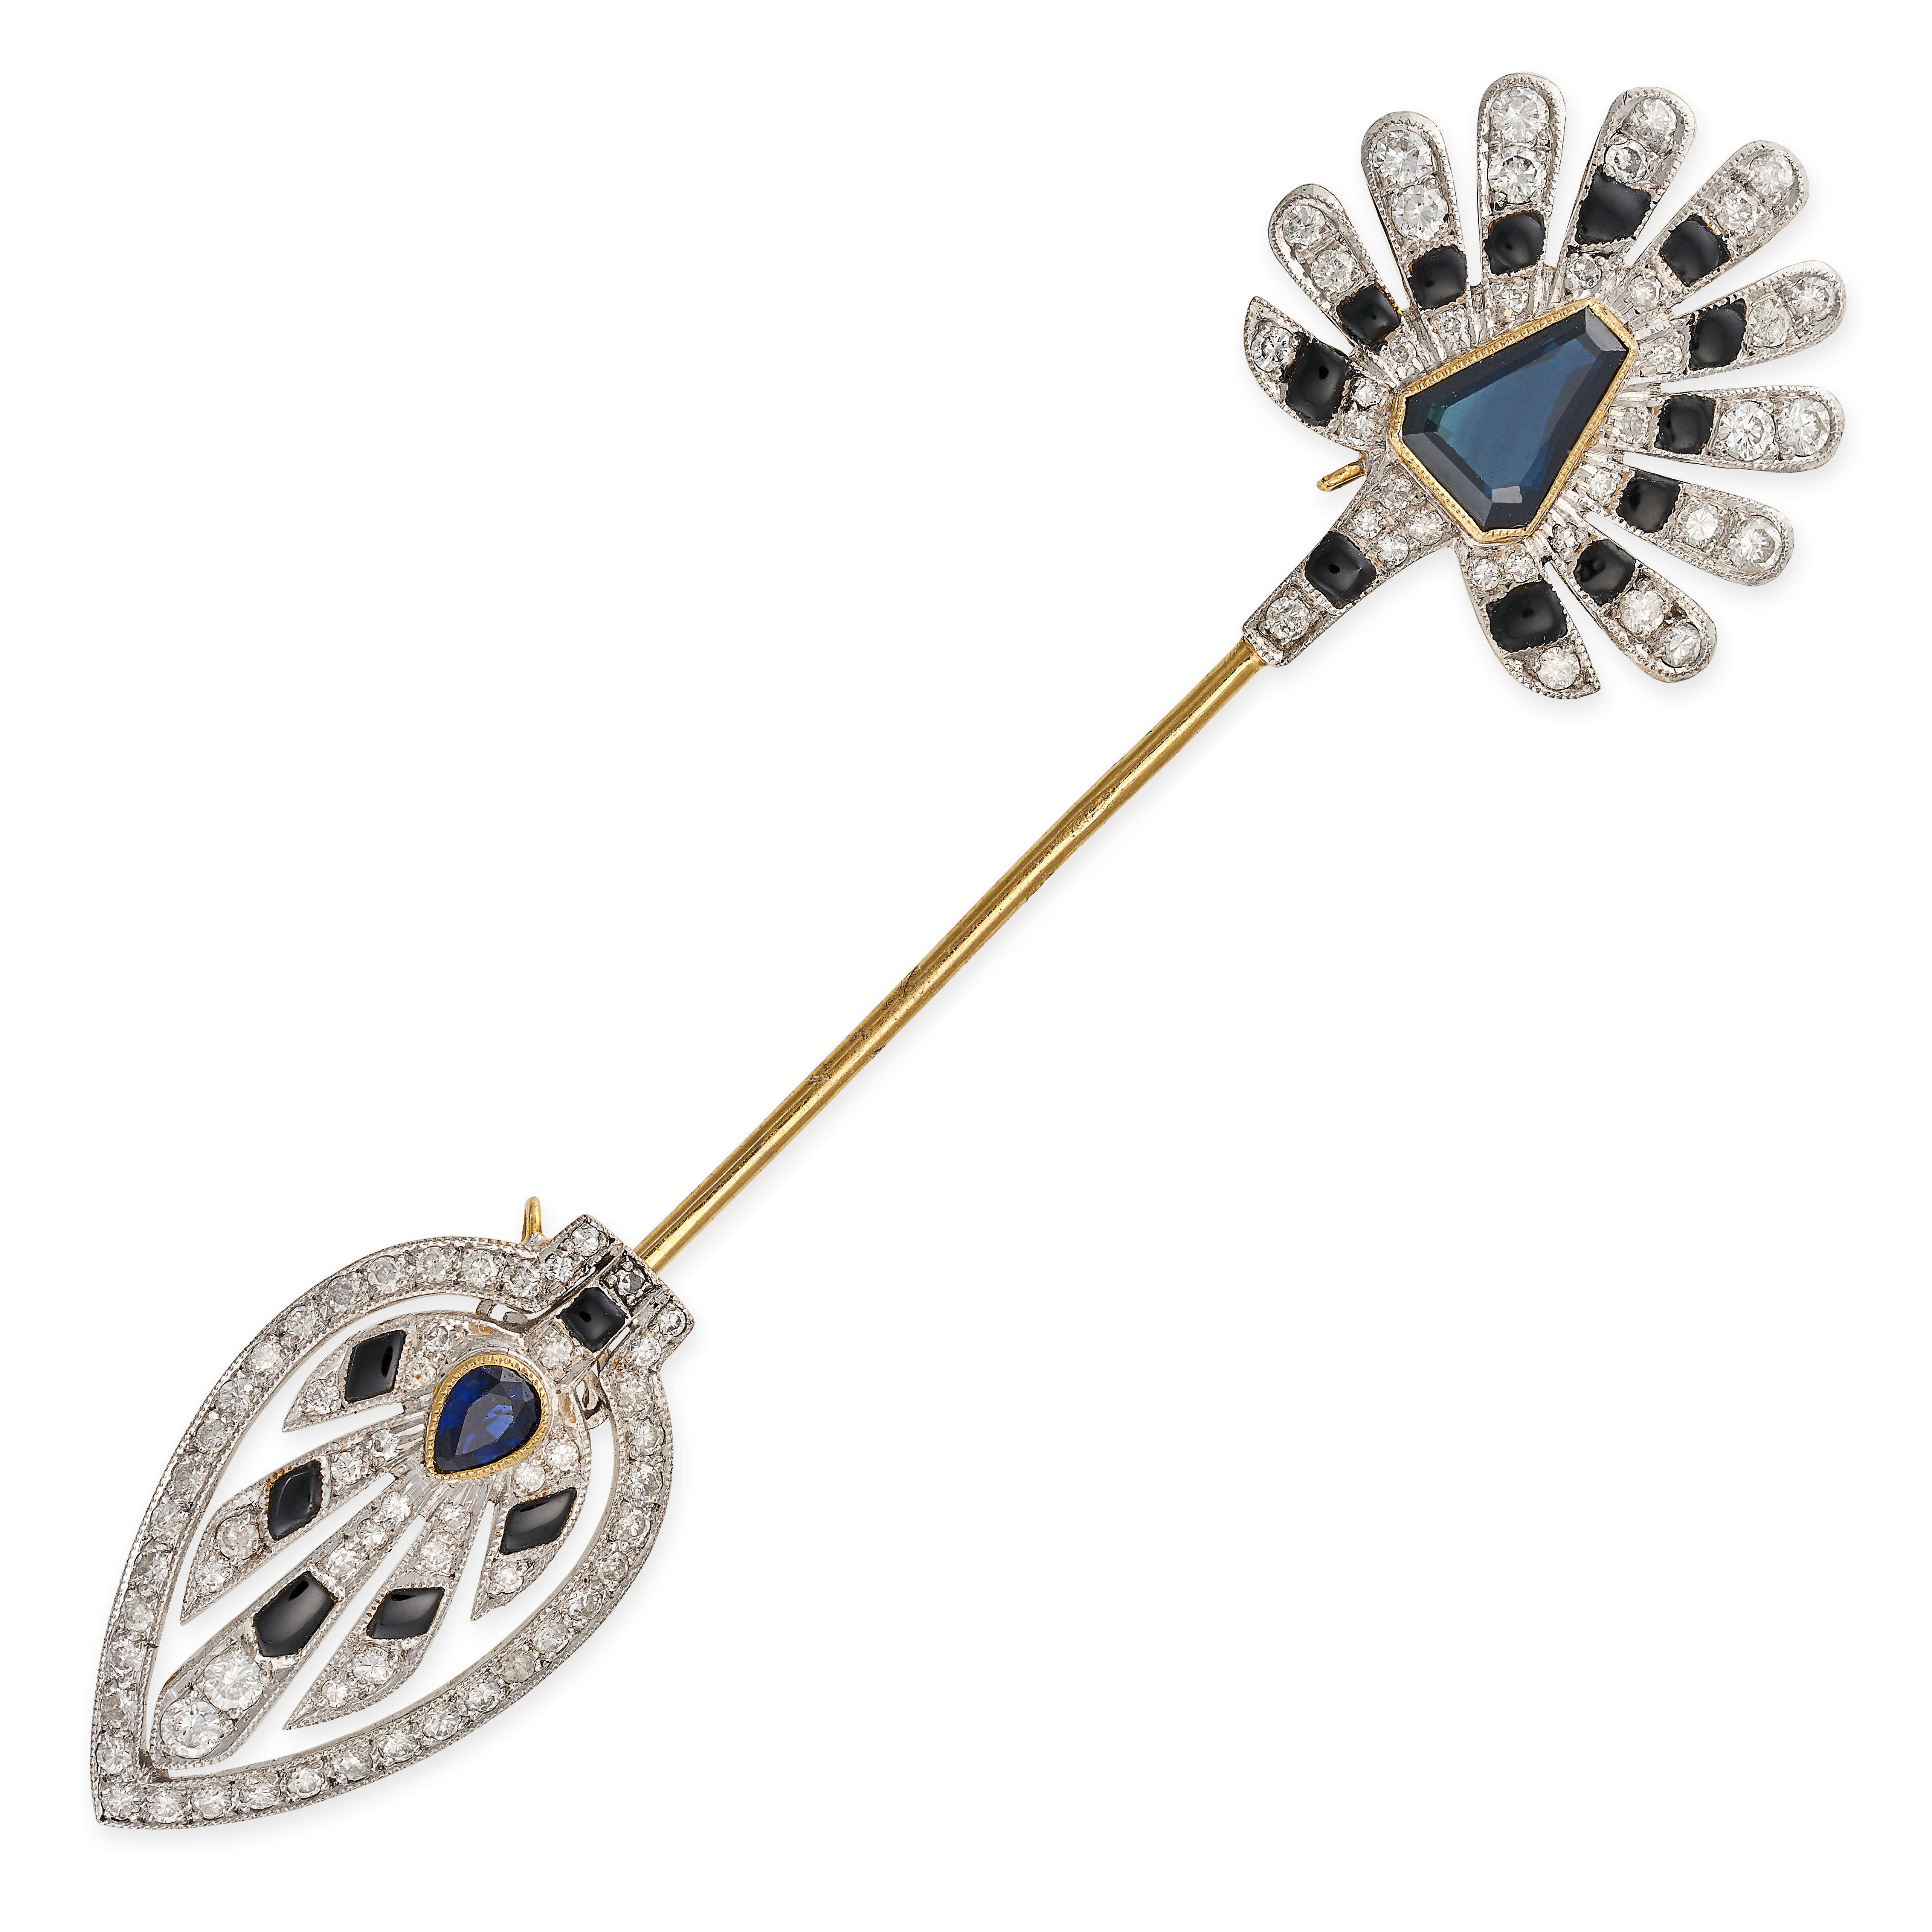 A SAPPHIRE, ONYX AND DIAMOND JABOT PIN BROOCH in 18ct yellow gold, designed as an arrow set with ... - Image 2 of 2